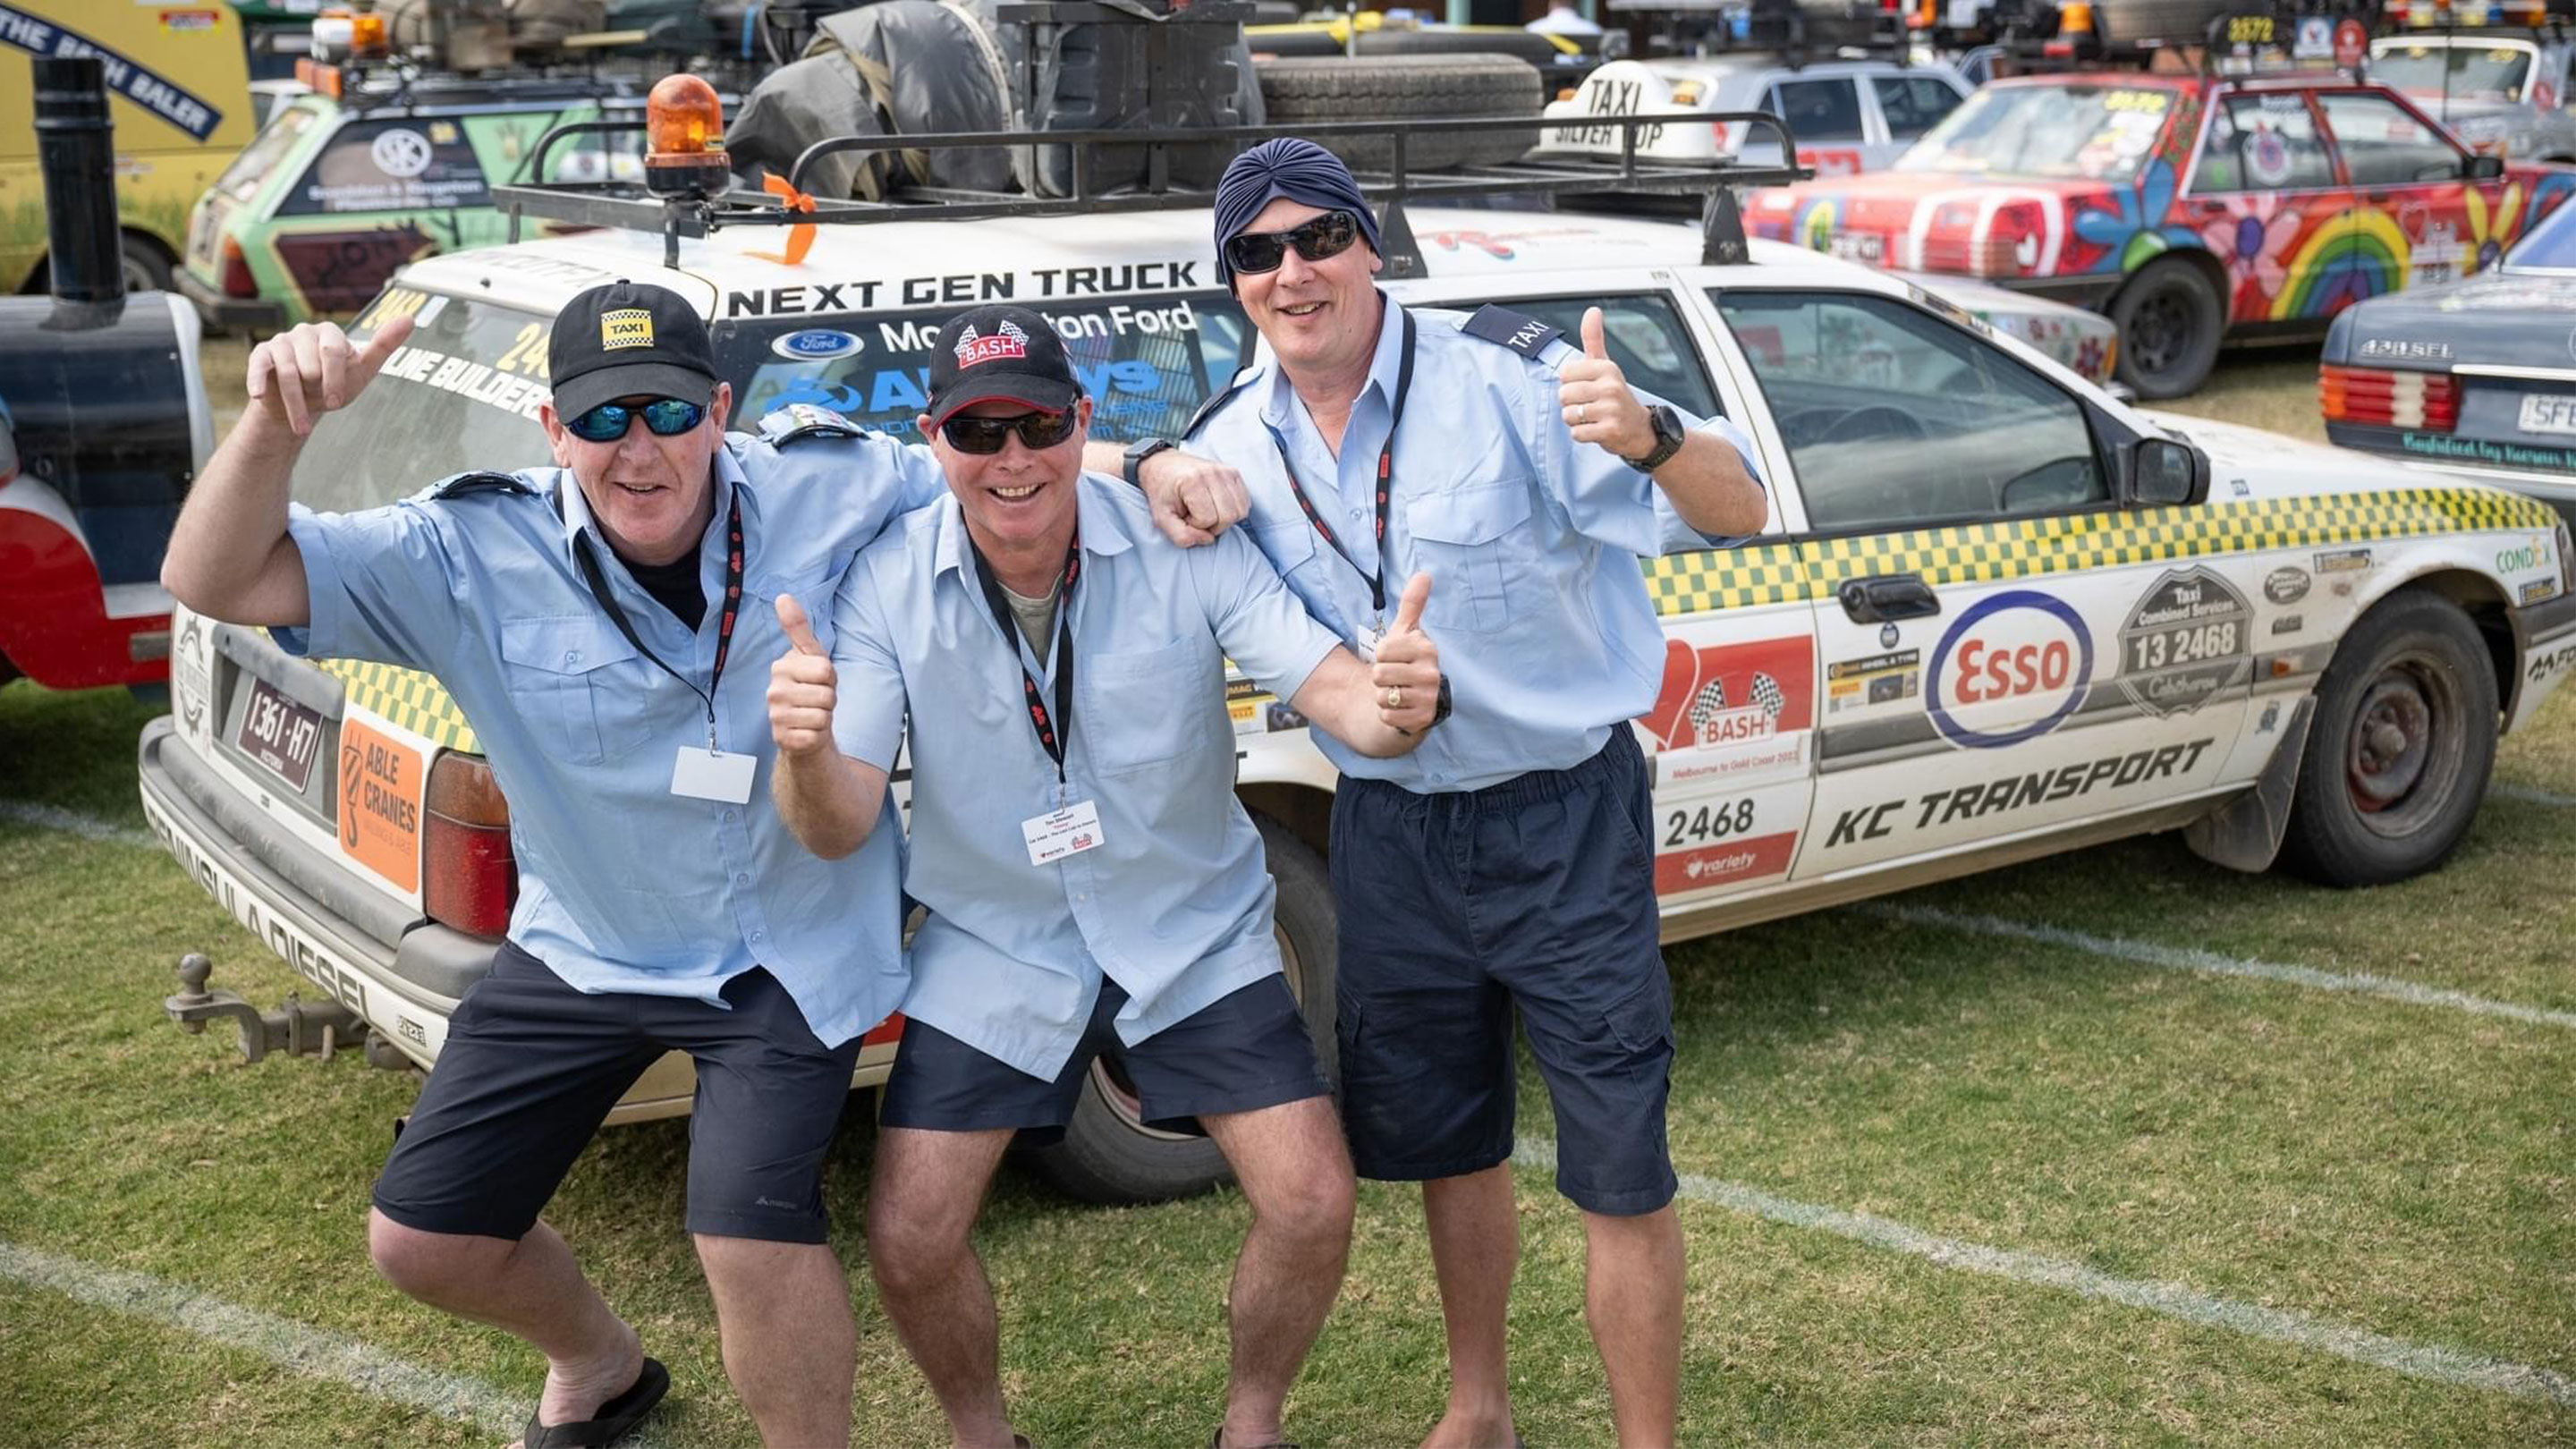 Variety Vic Bash - Bringing smiles to children's faces